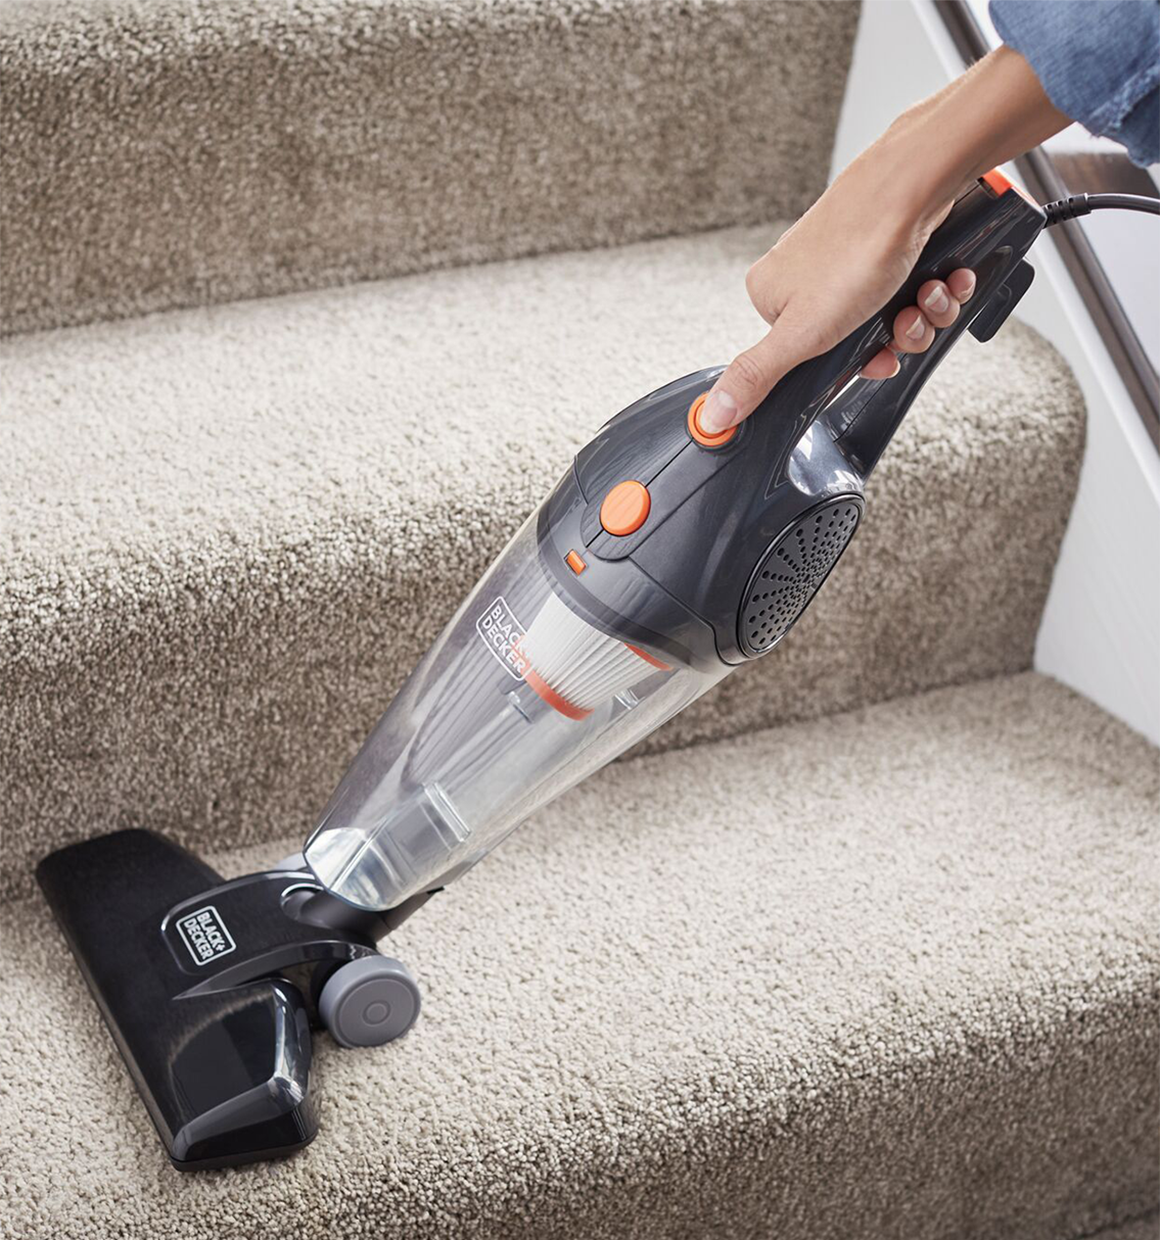 Black & Decker BDST1609 3-in-1 Corded Lightweight Handheld Cleaner & Stick  Vacuum Cleaner, White with Aqua Blue 